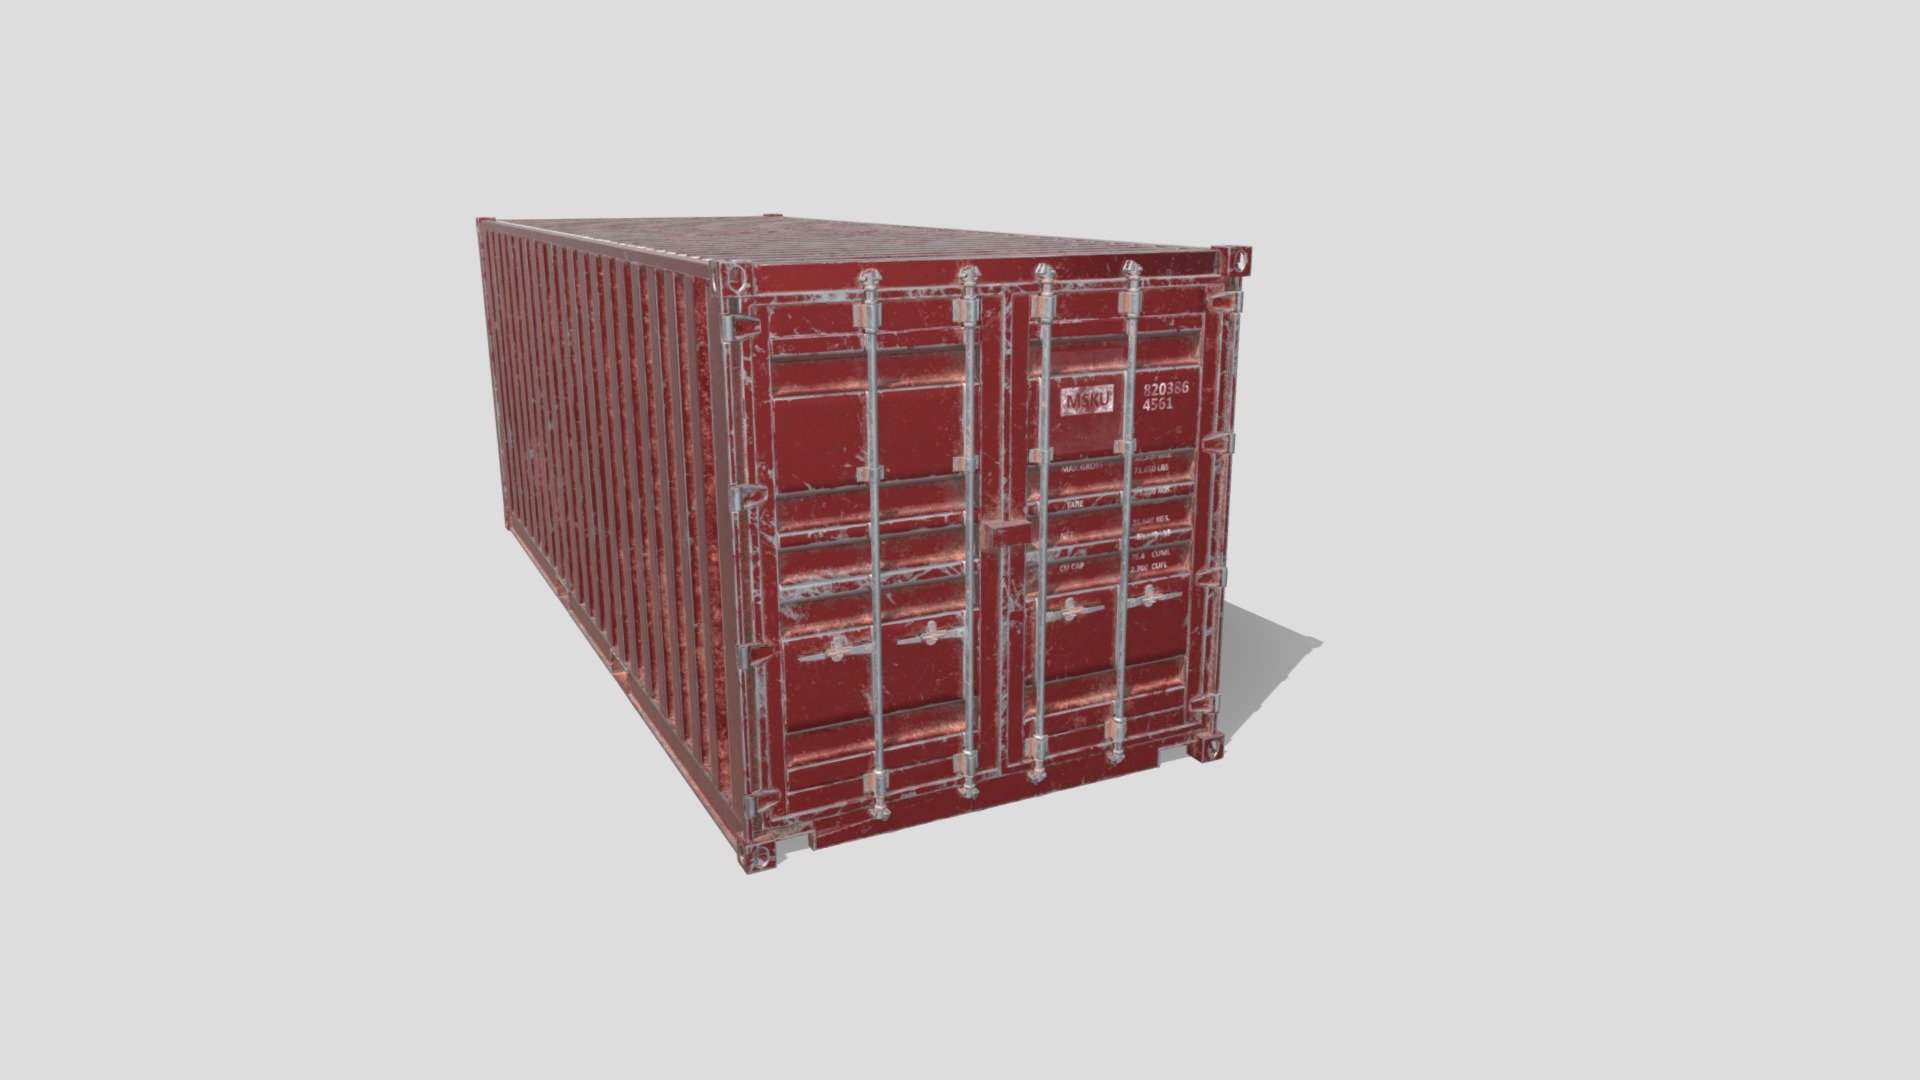 3D model Rusty Shipping Container - This is a 3D model of the Rusty Shipping Container. The 3D model is about a red and white box.